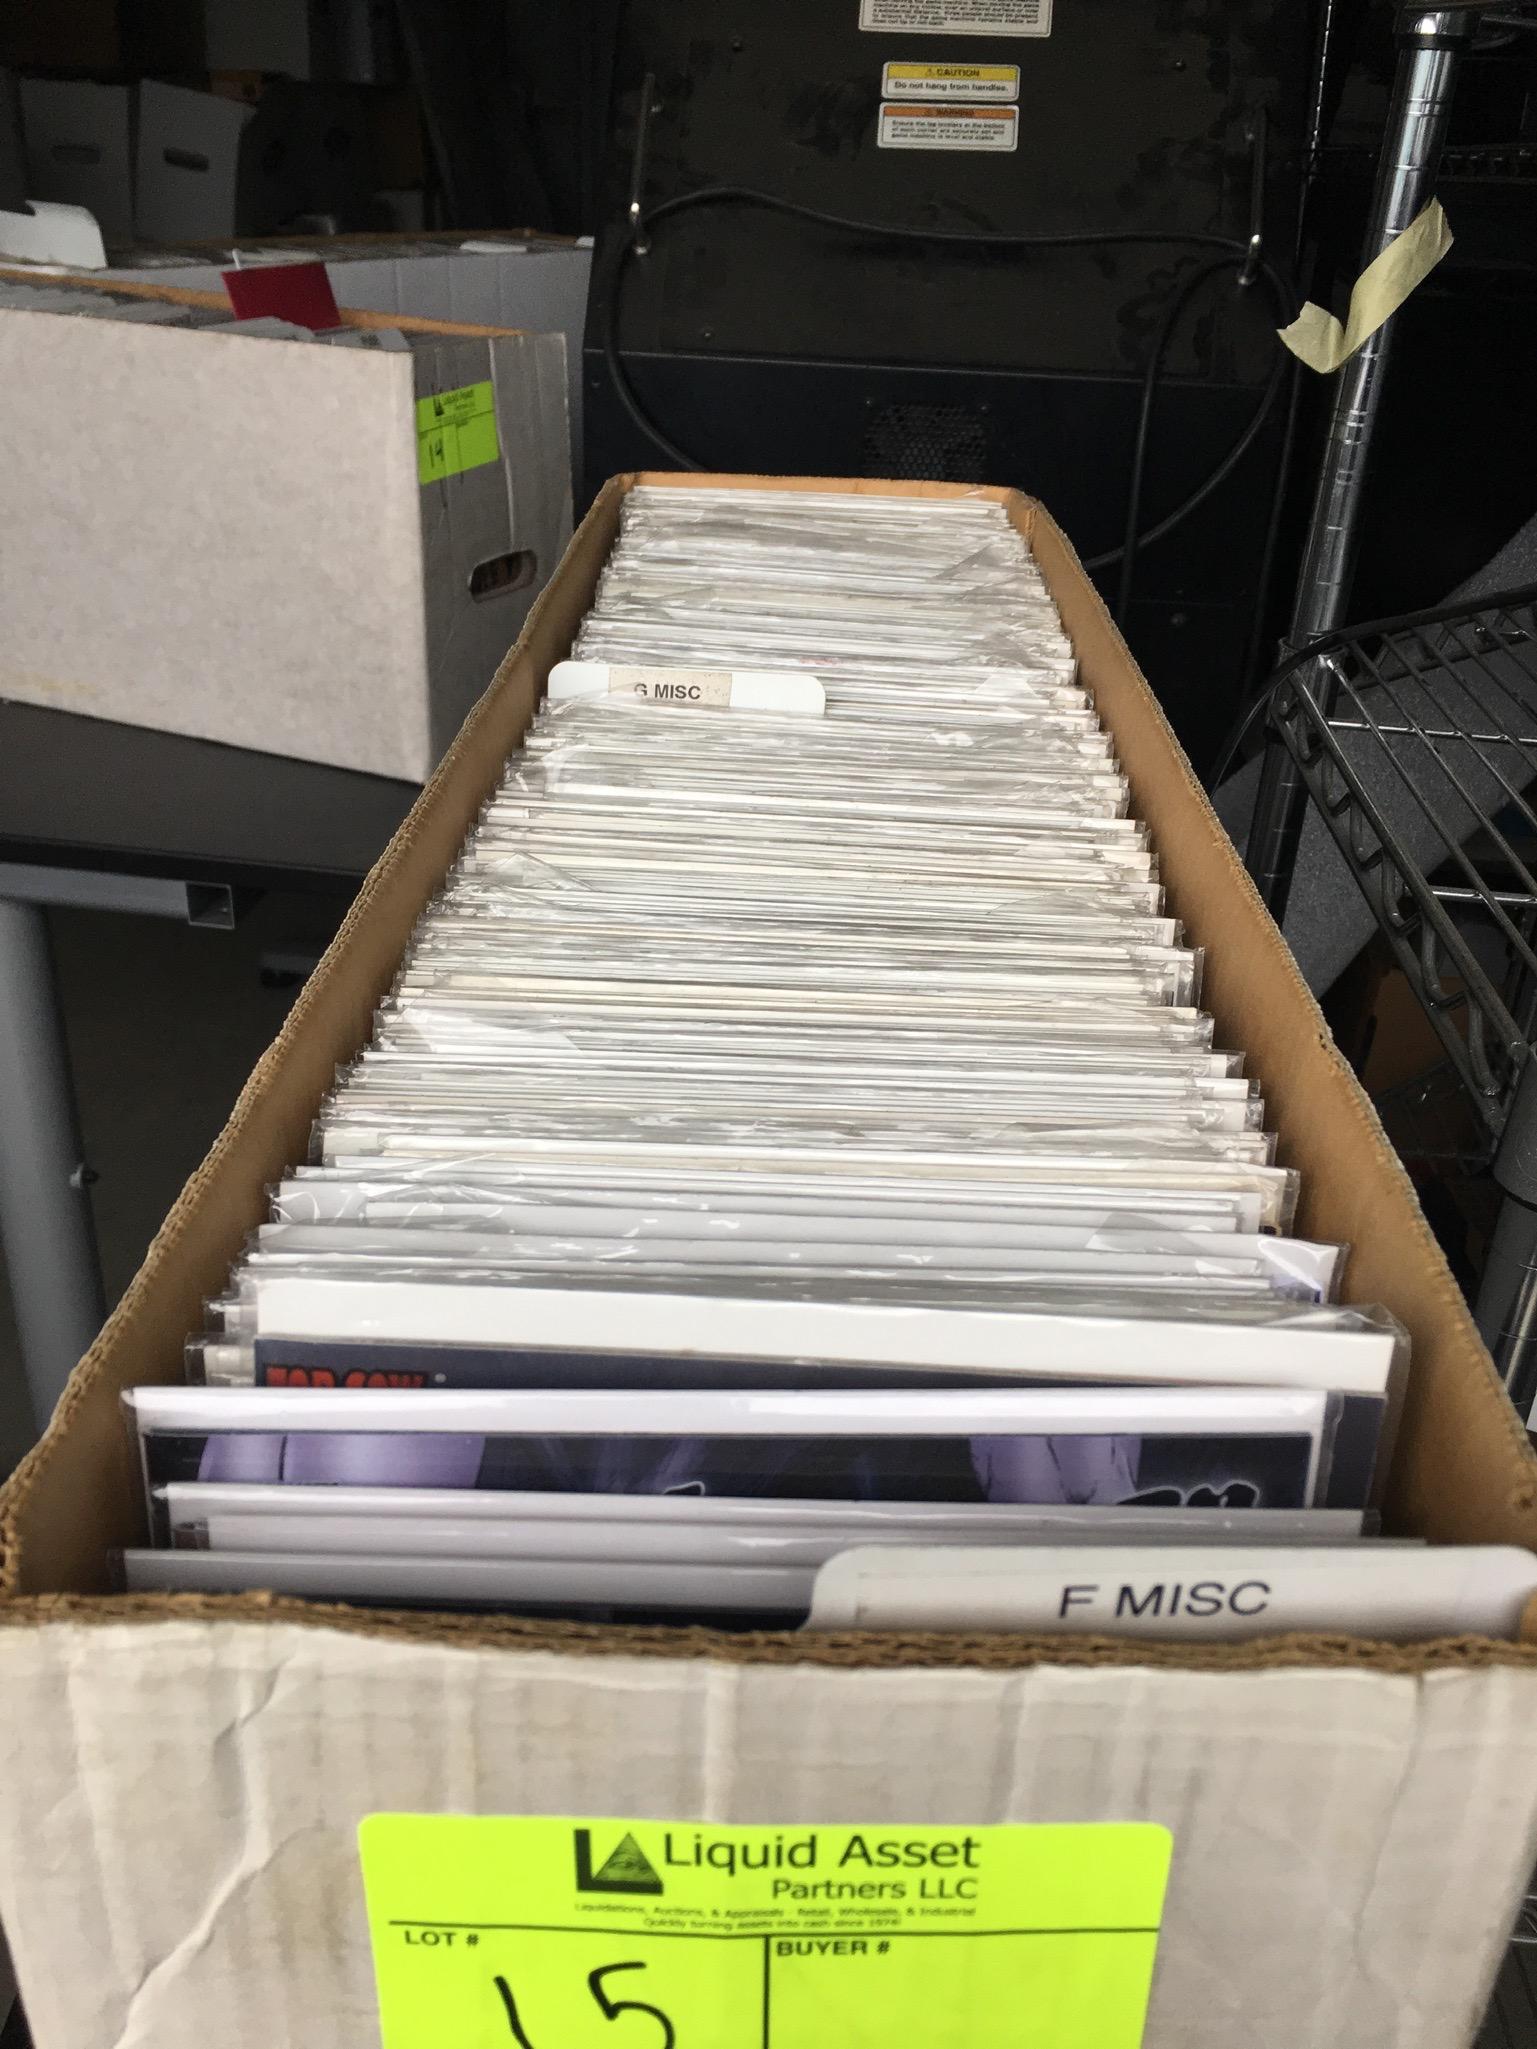 Approx 200+ misc new comic books